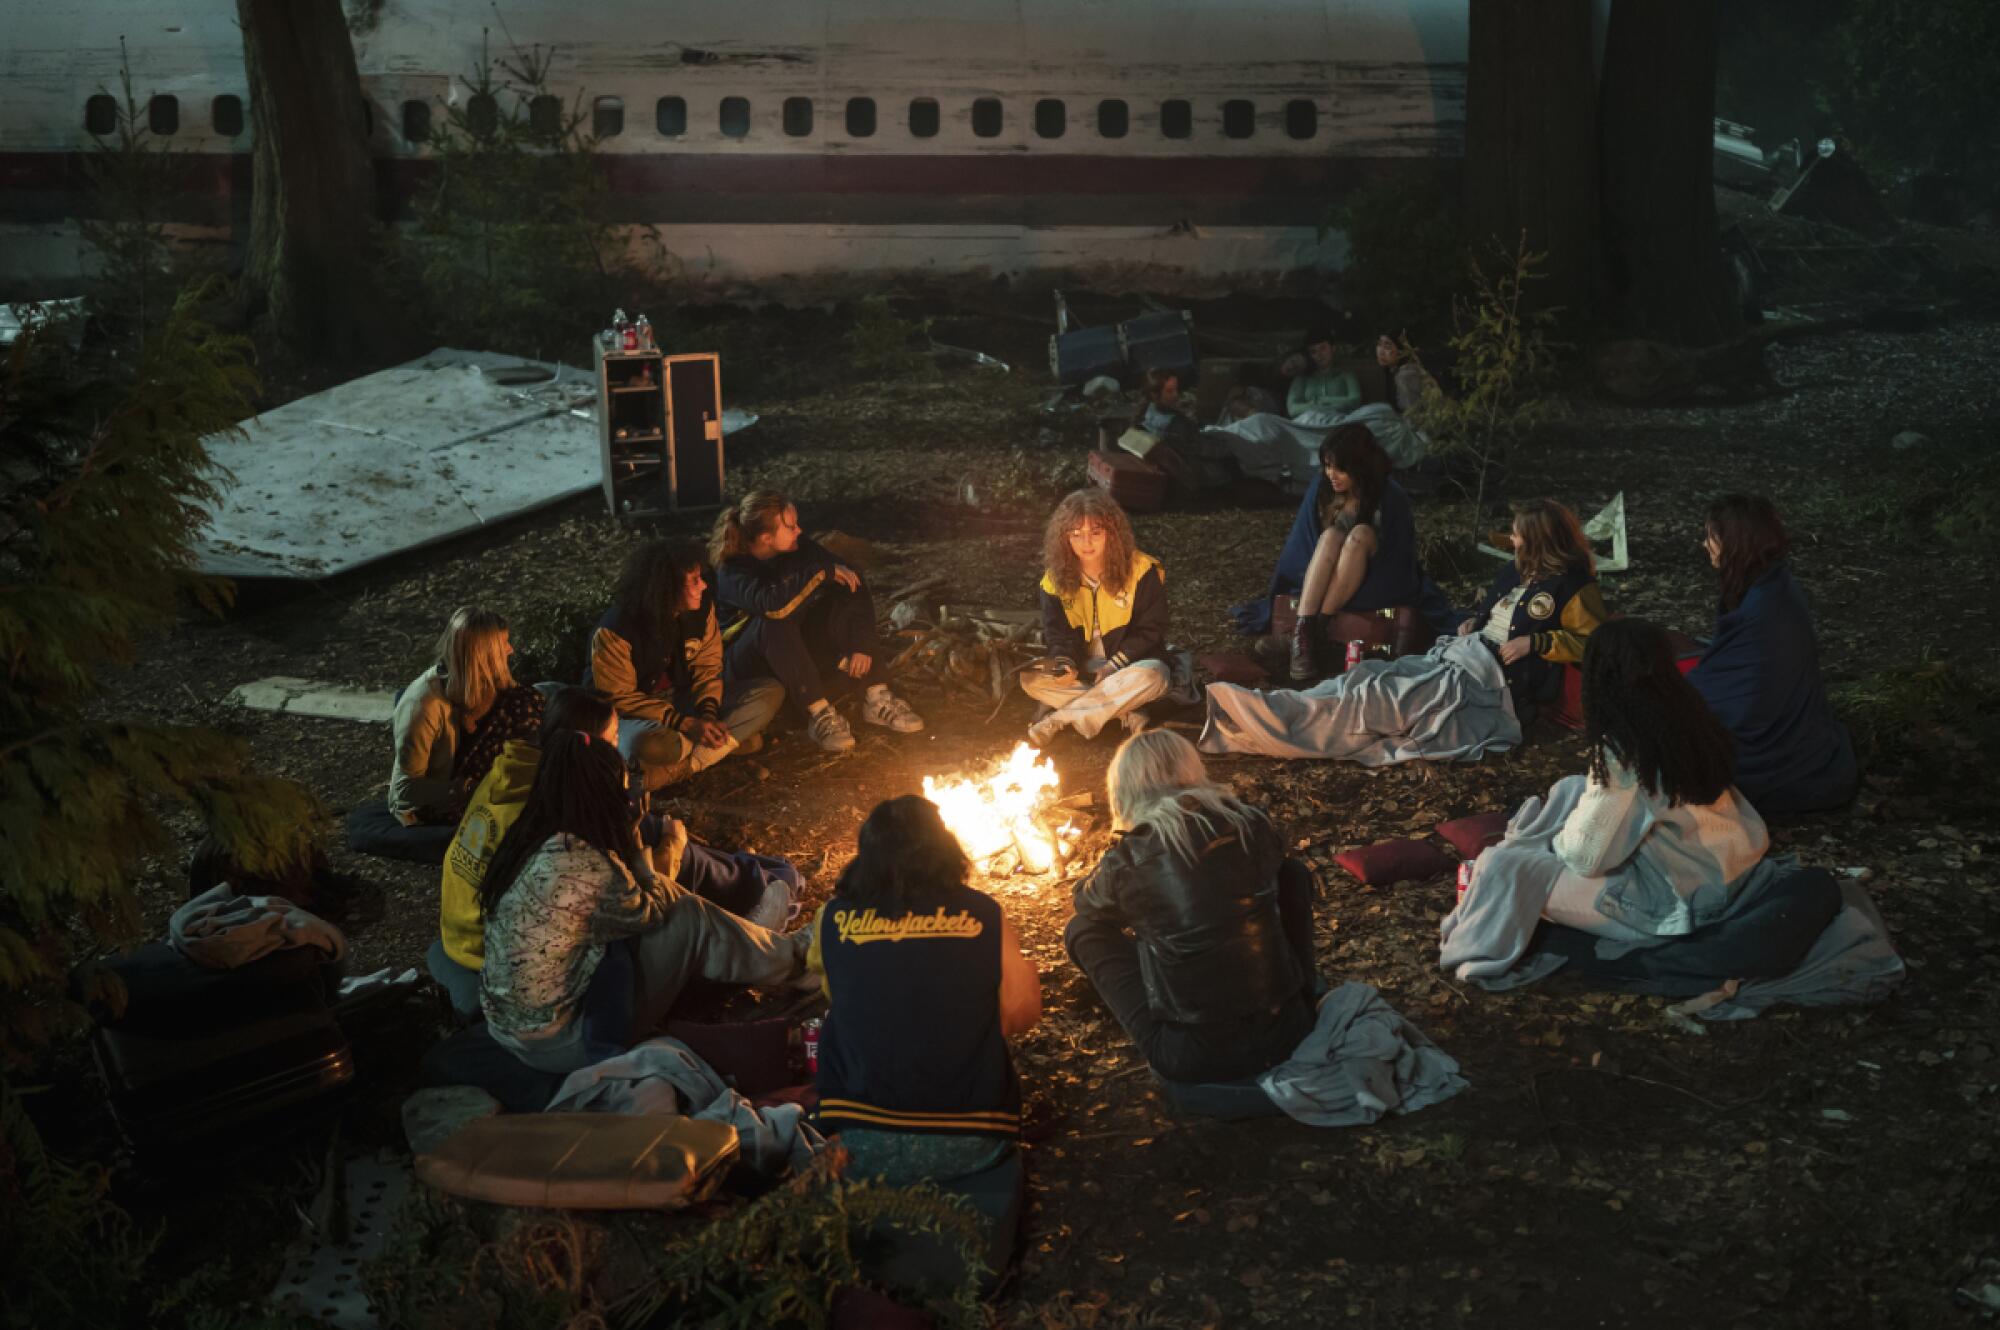 The teenage survivors of a plane crash sit around a fire in the wilderness in "Yellowjackets."